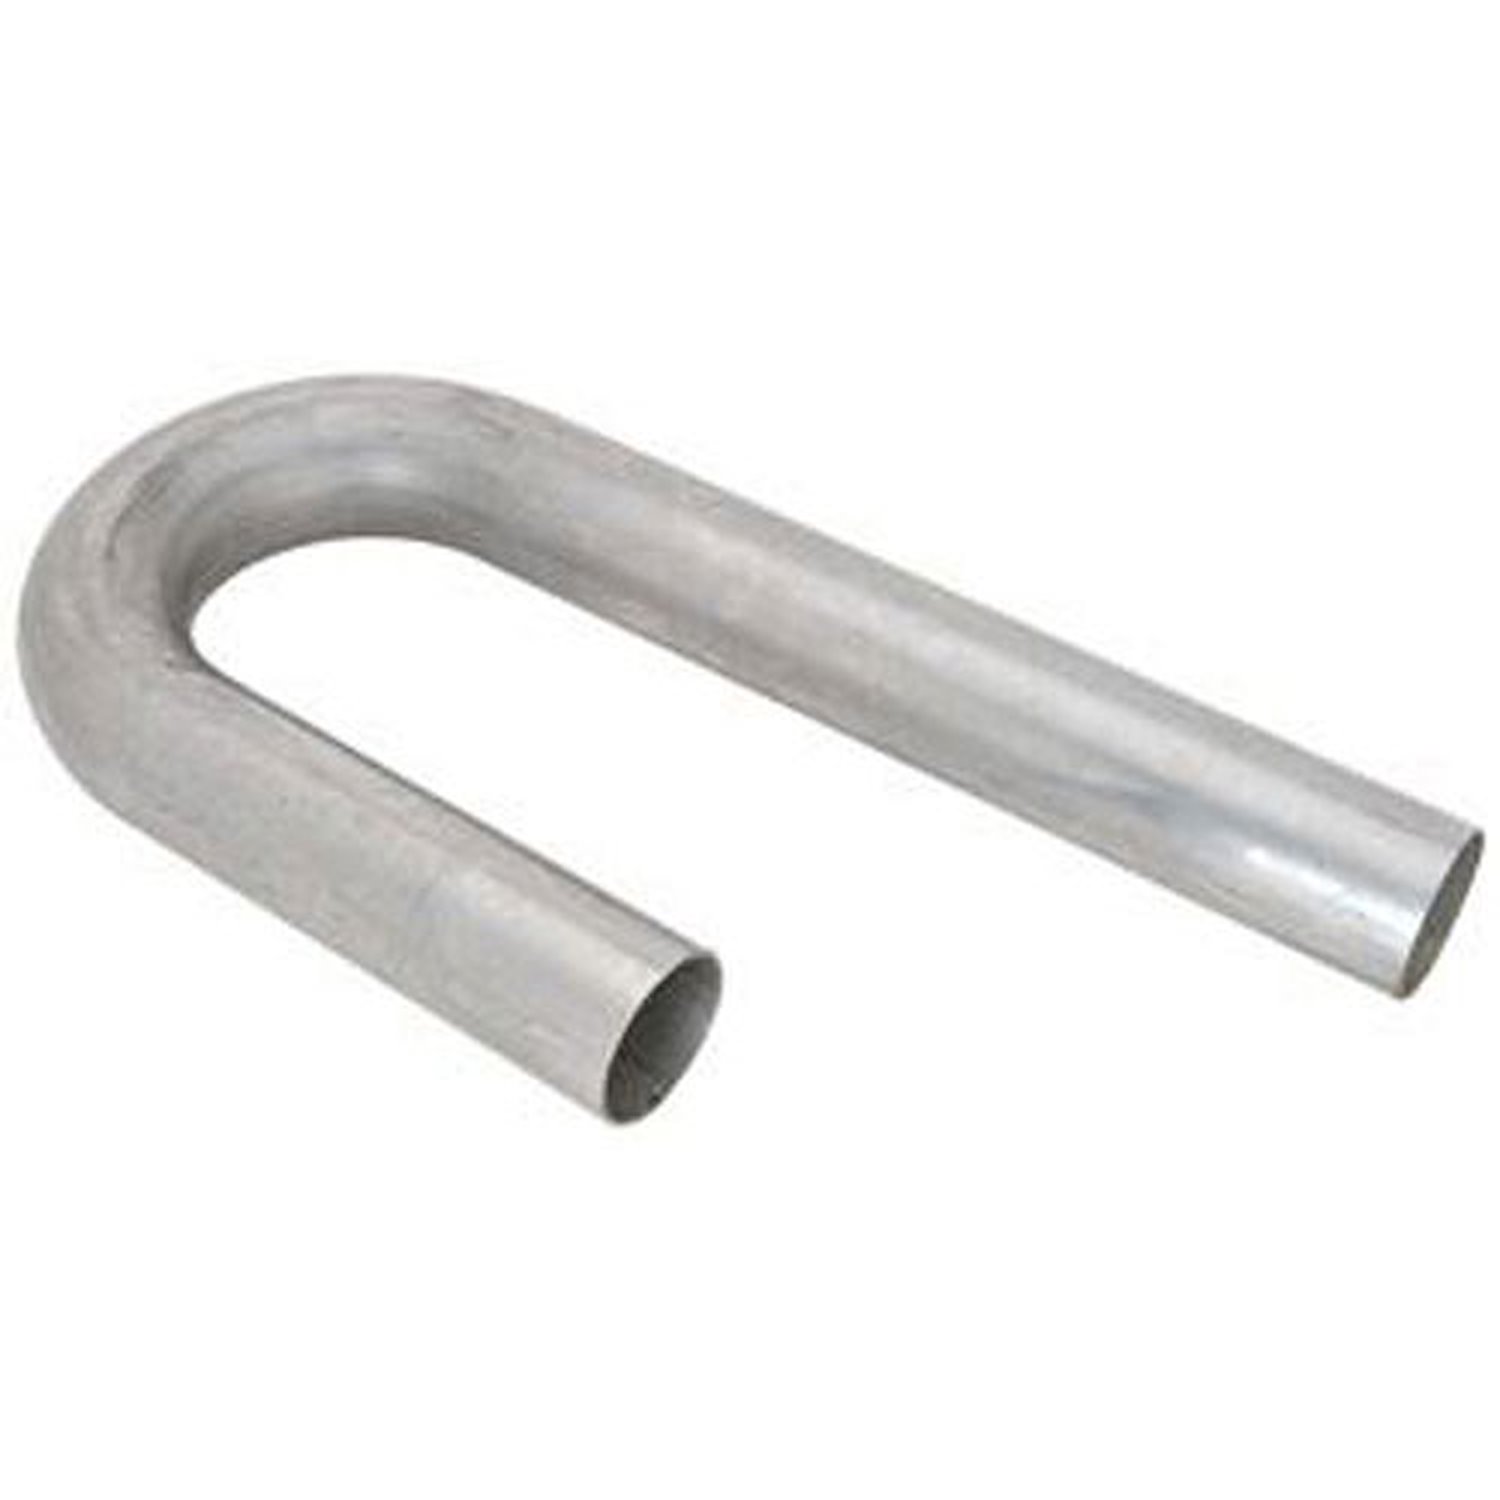 Stainless Steel 1-5/8" J-Bend